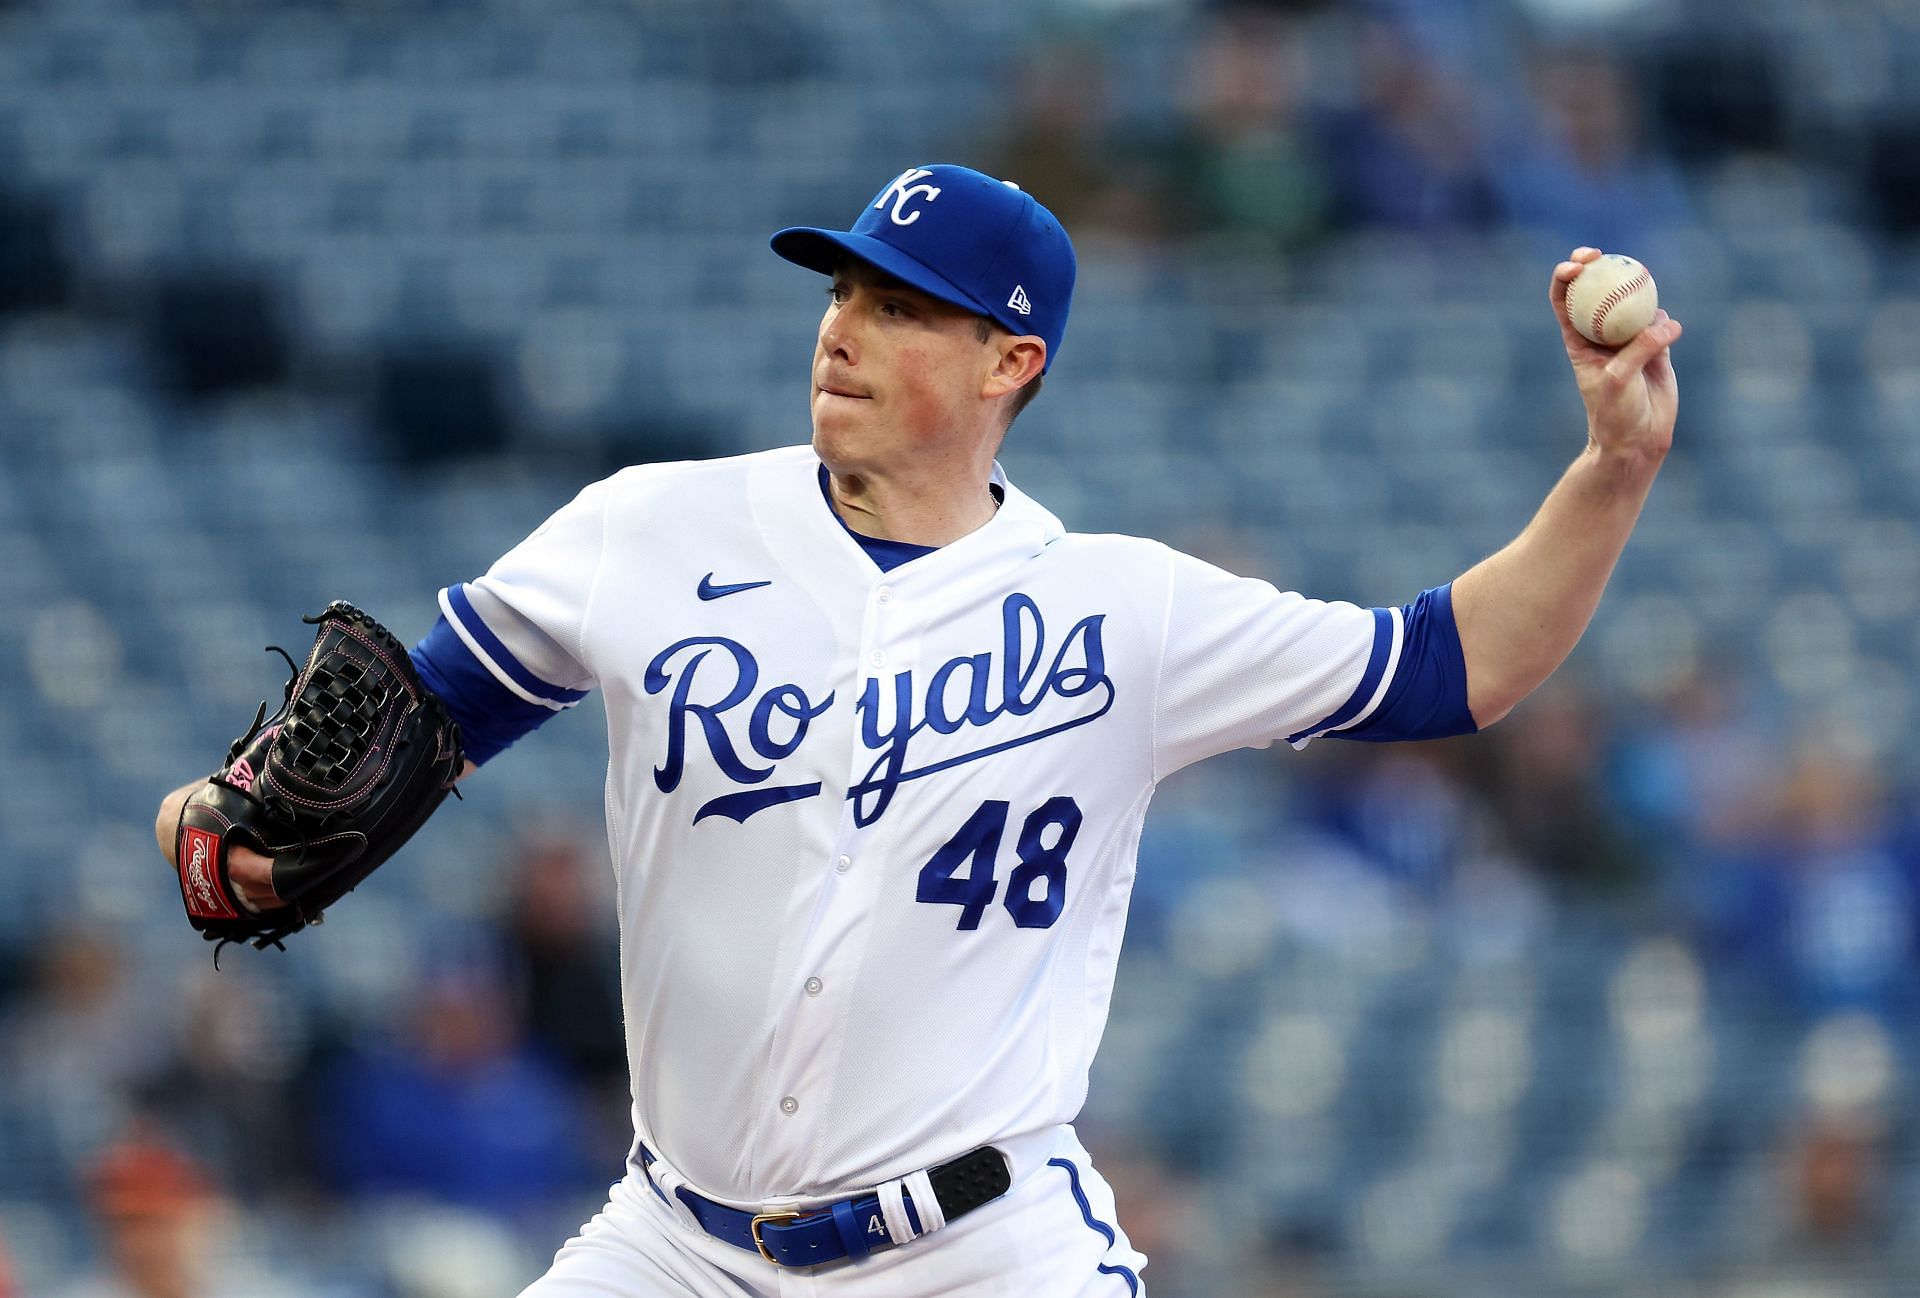 Royals pitcher Yarbrough starting for KC for 1st time since being struck by  line drive in face - NBC Sports